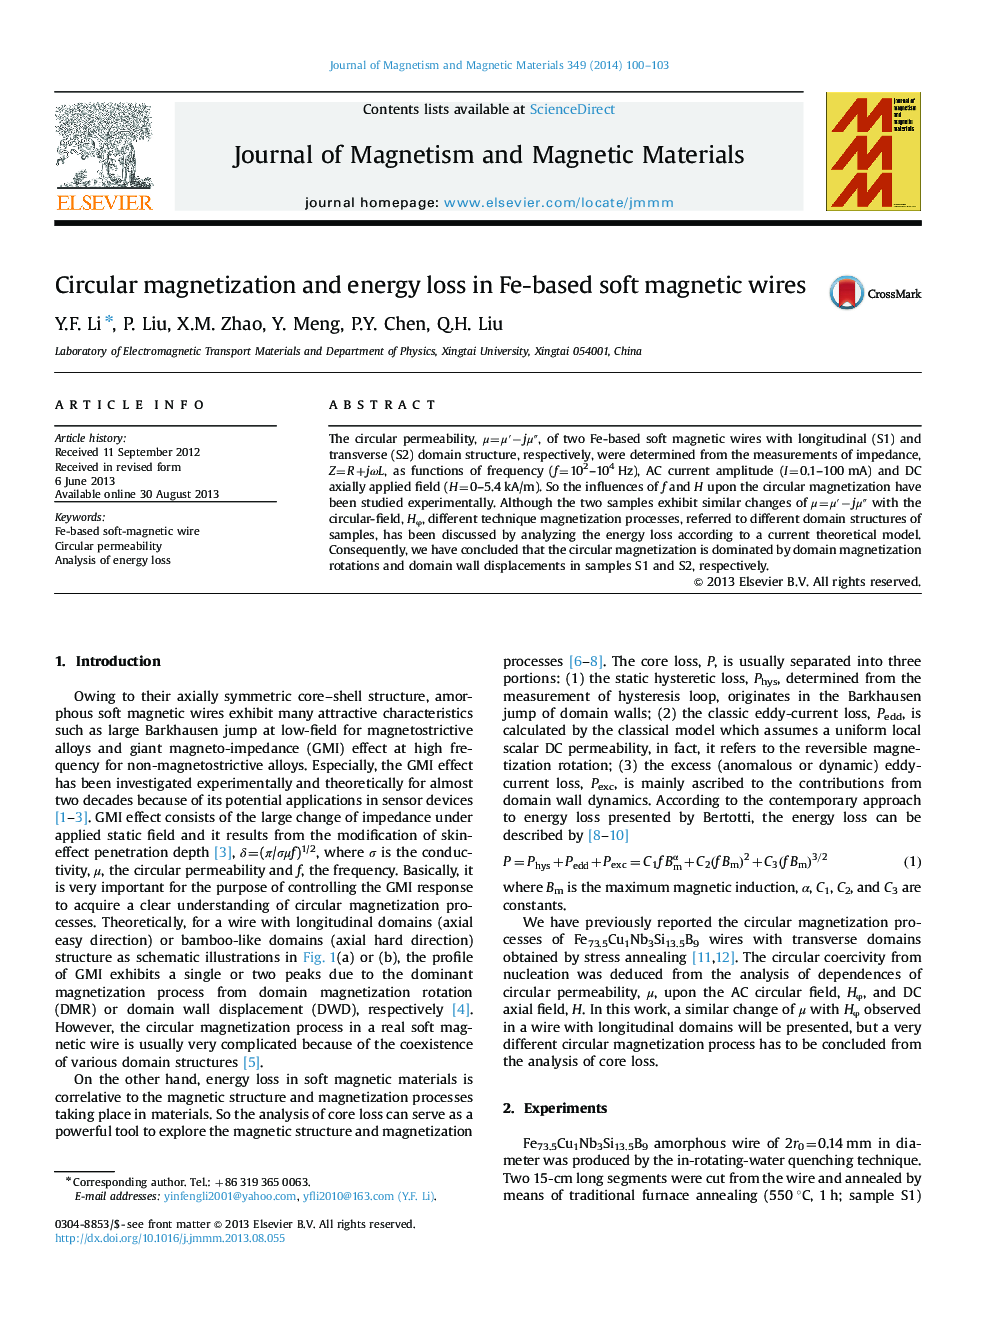 Circular magnetization and energy loss in Fe-based soft magnetic wires